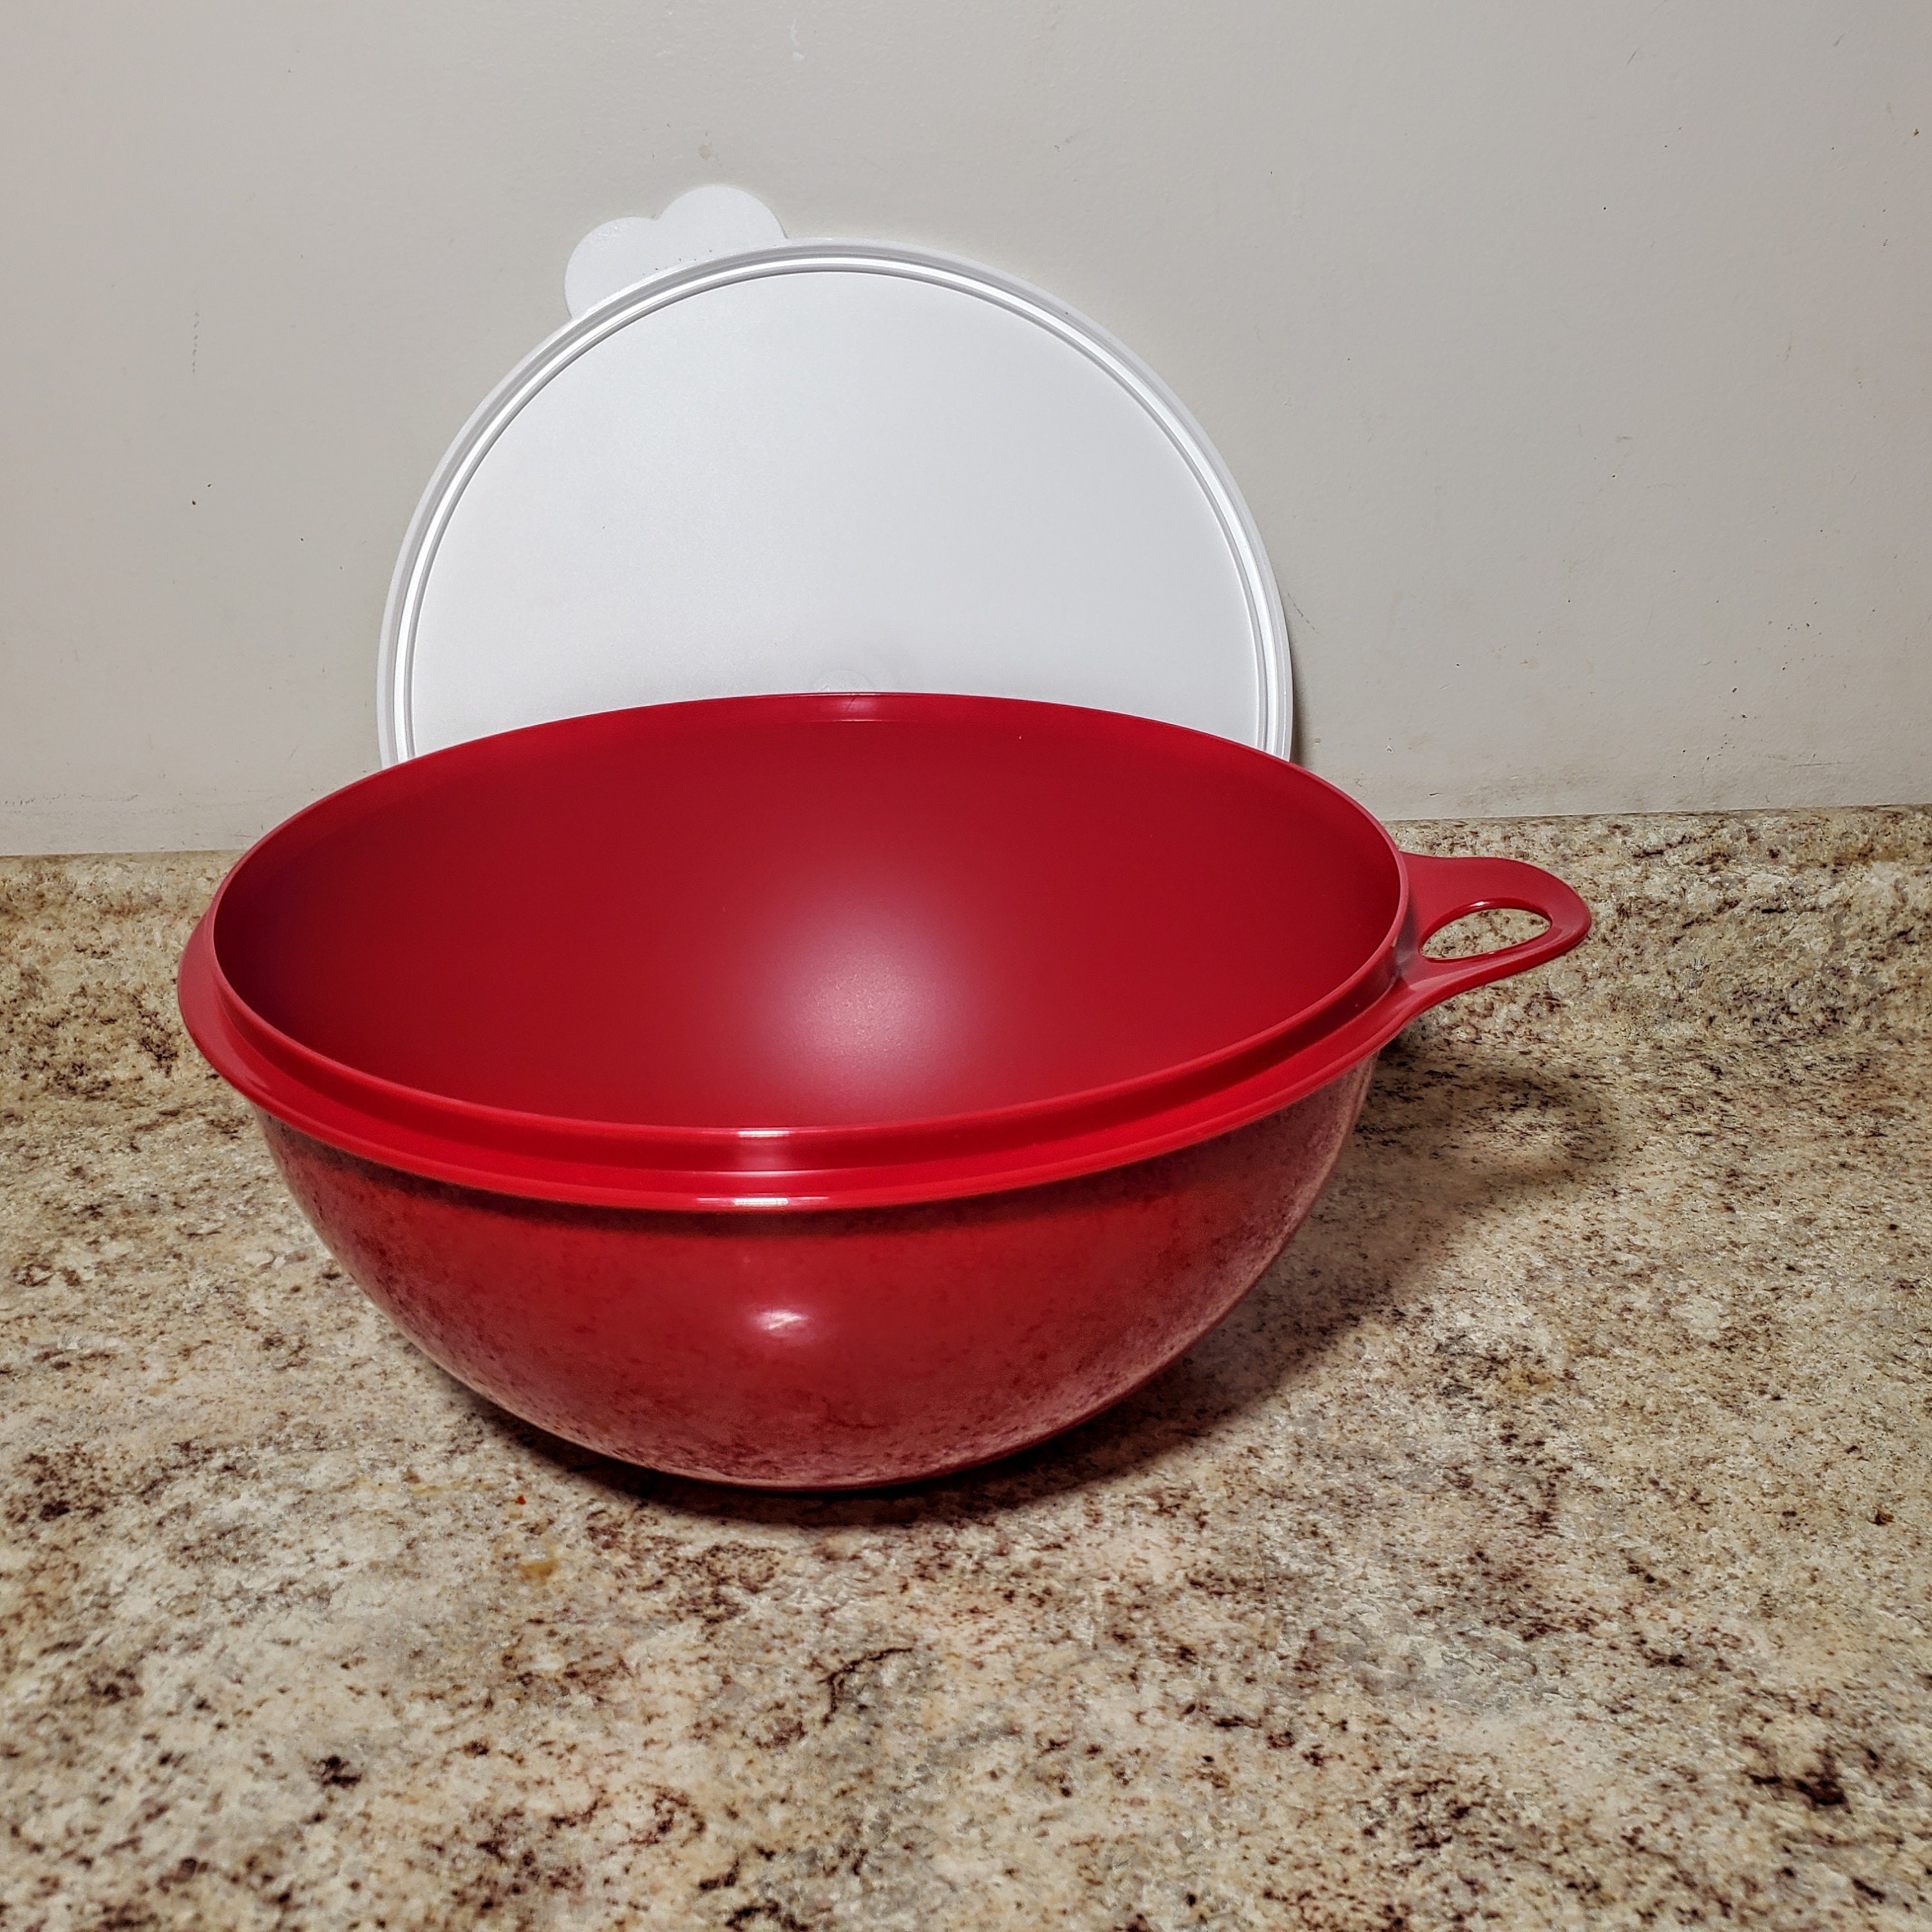 Tupperware Thatsa Bowl 32 Cup White Bowl #2539 With Red Seal #2540